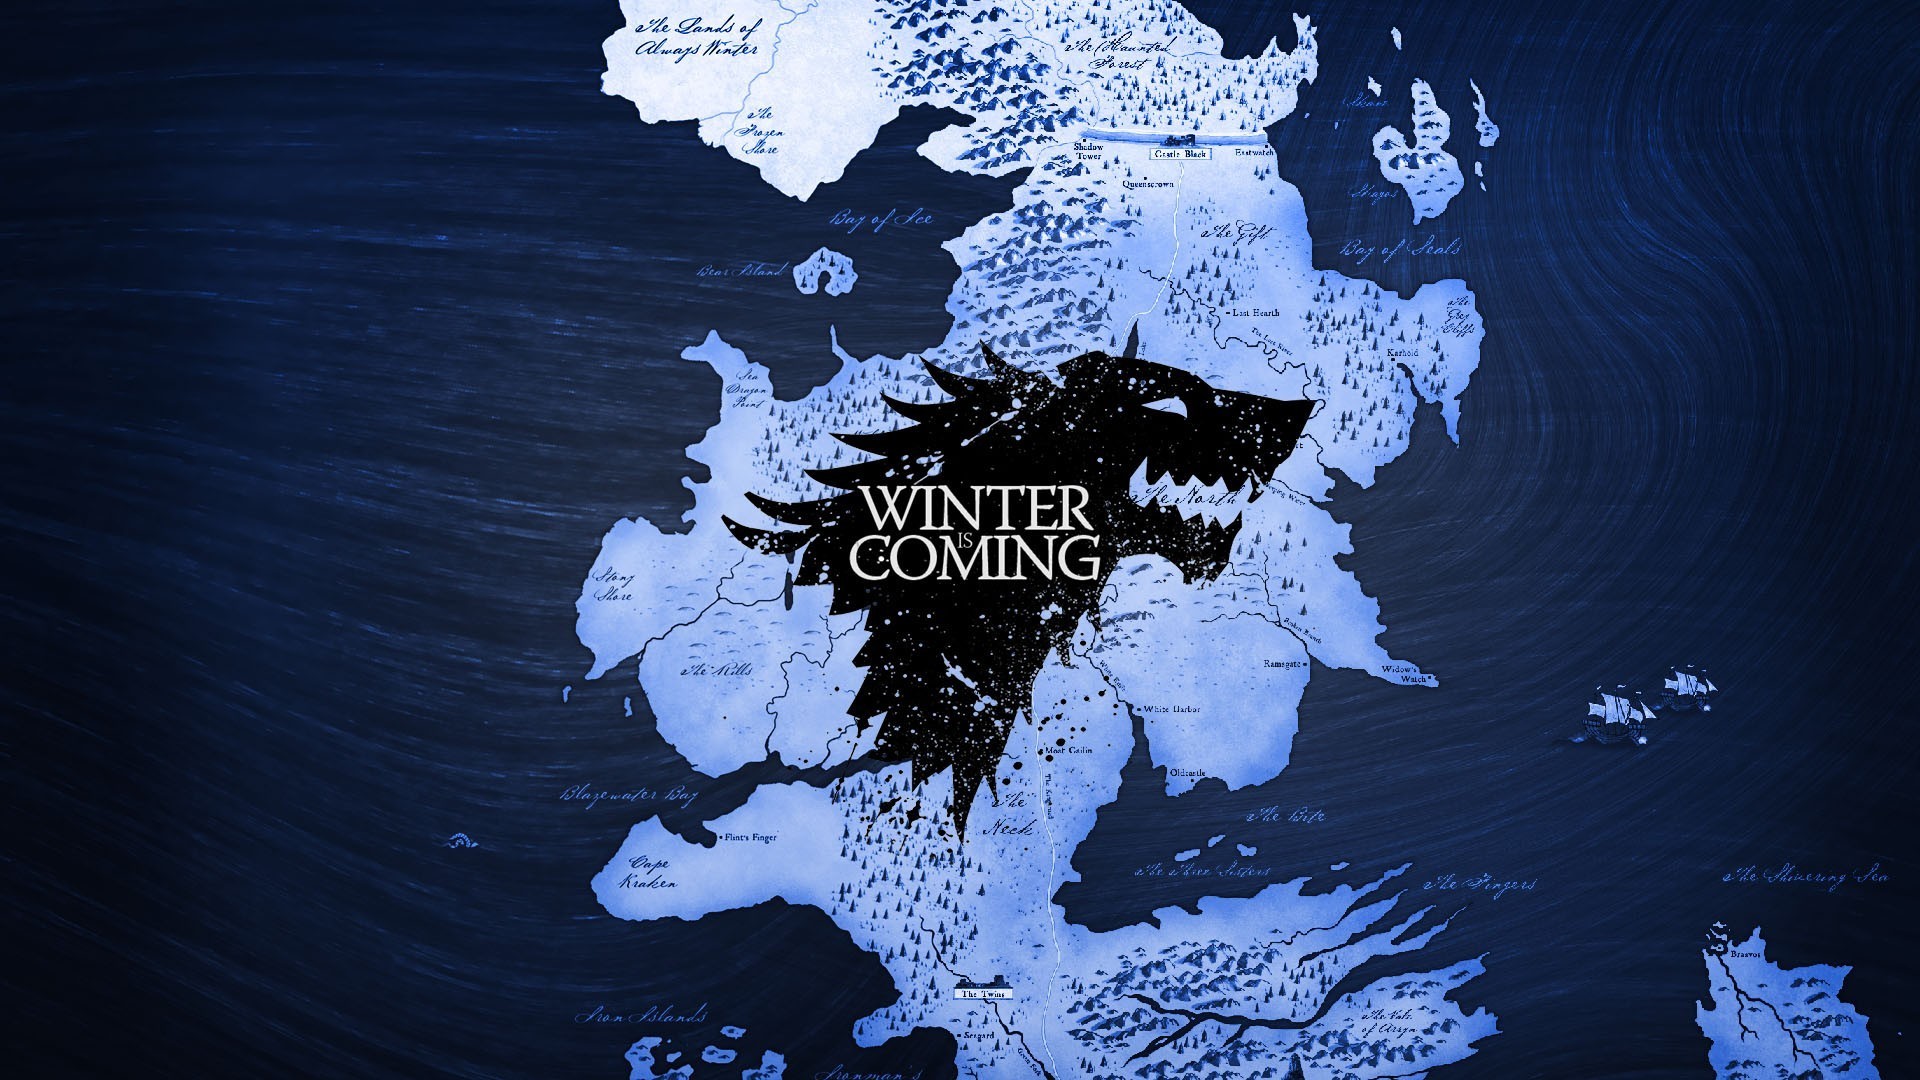 1920x1080 General  Game of Thrones map Westeros Winterfell A Song of Ice and  Fire House Stark